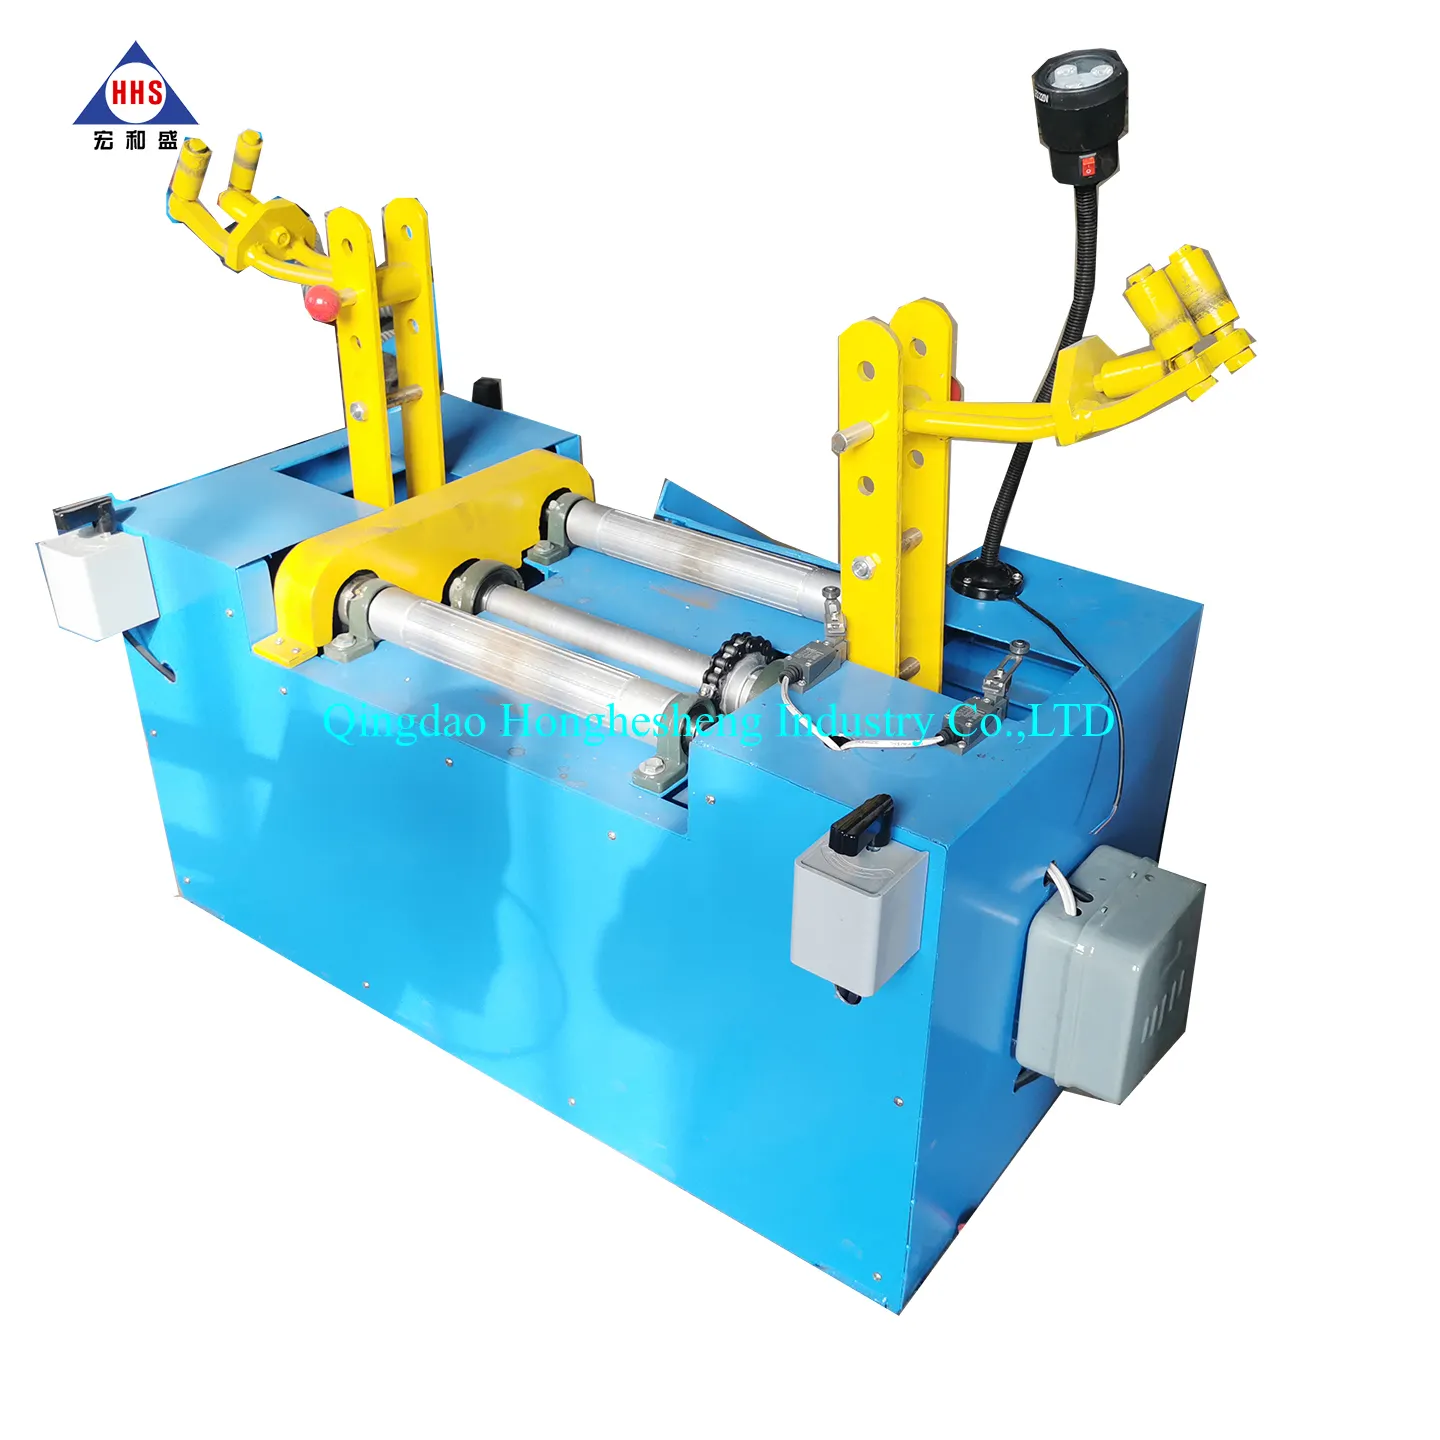 Tyre recapping machine / tyre retreading inspection machine / tire tread buffing machine for sale